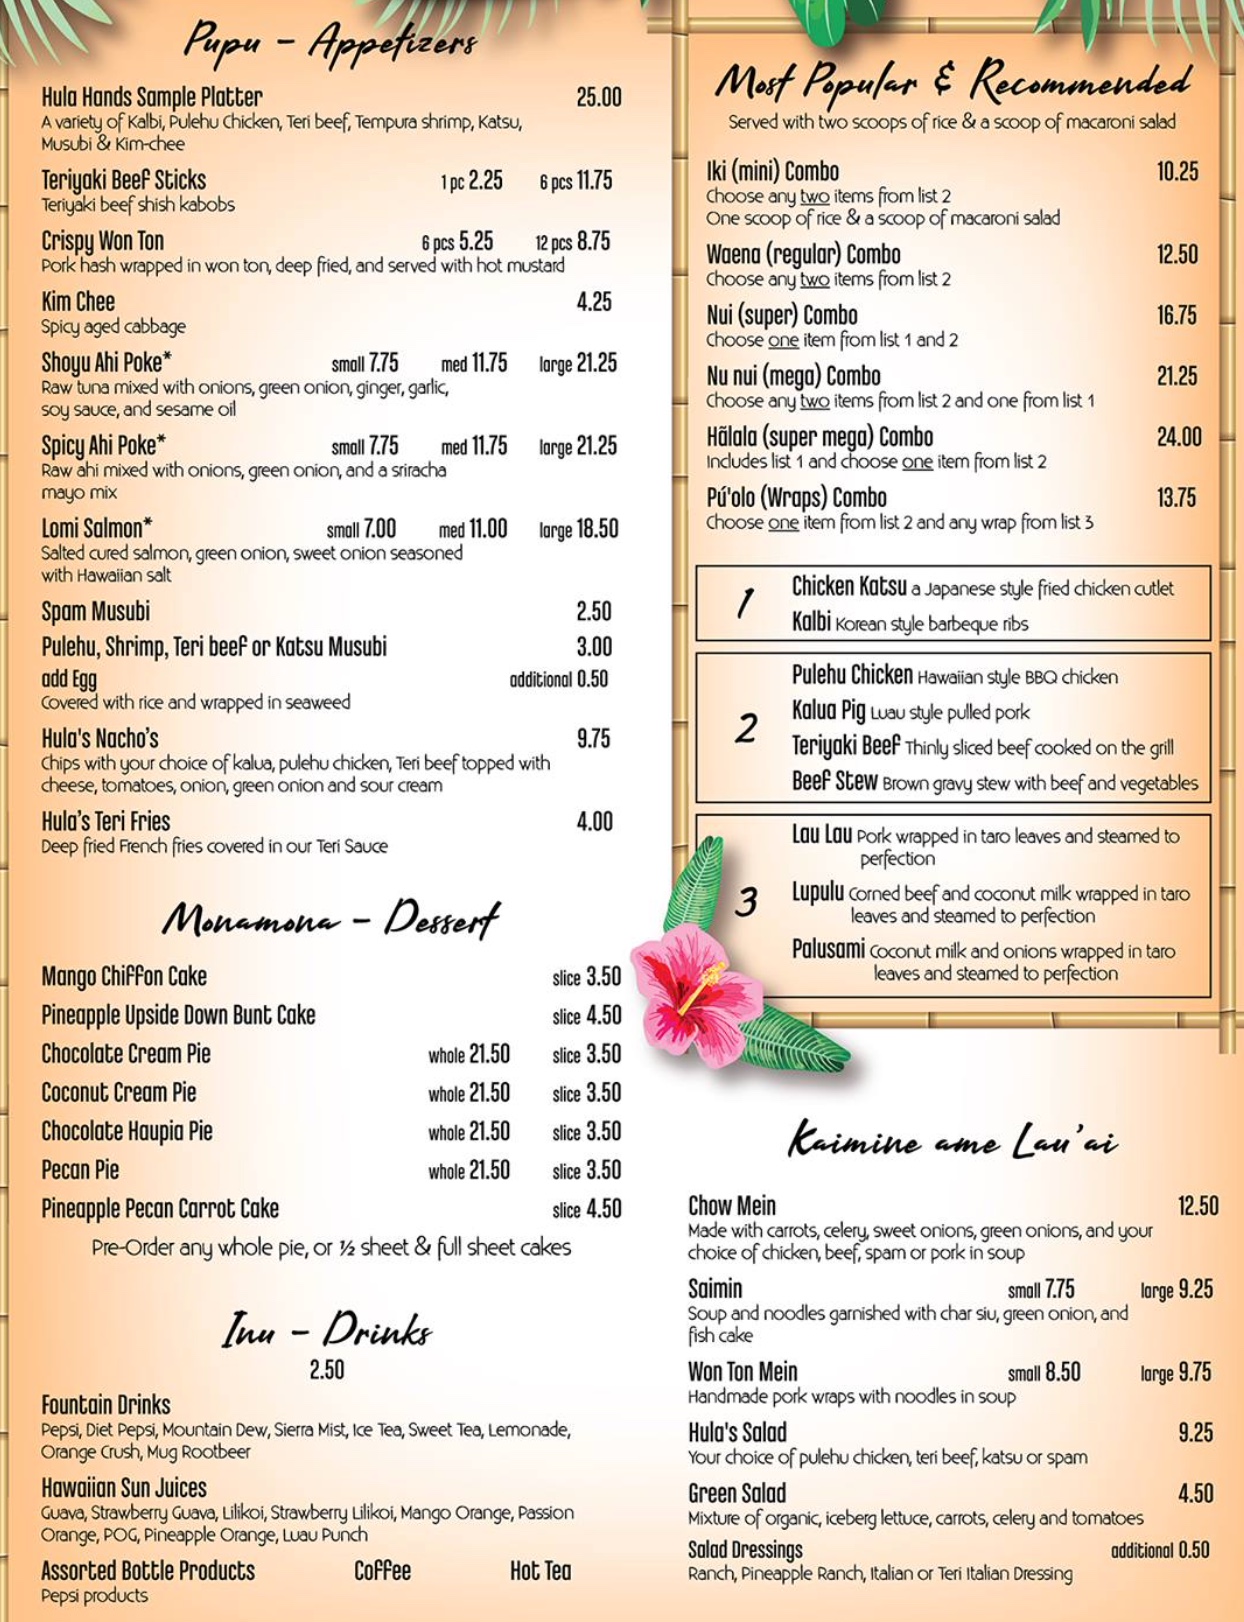 Hula Hands Restaurant Menu With Prices